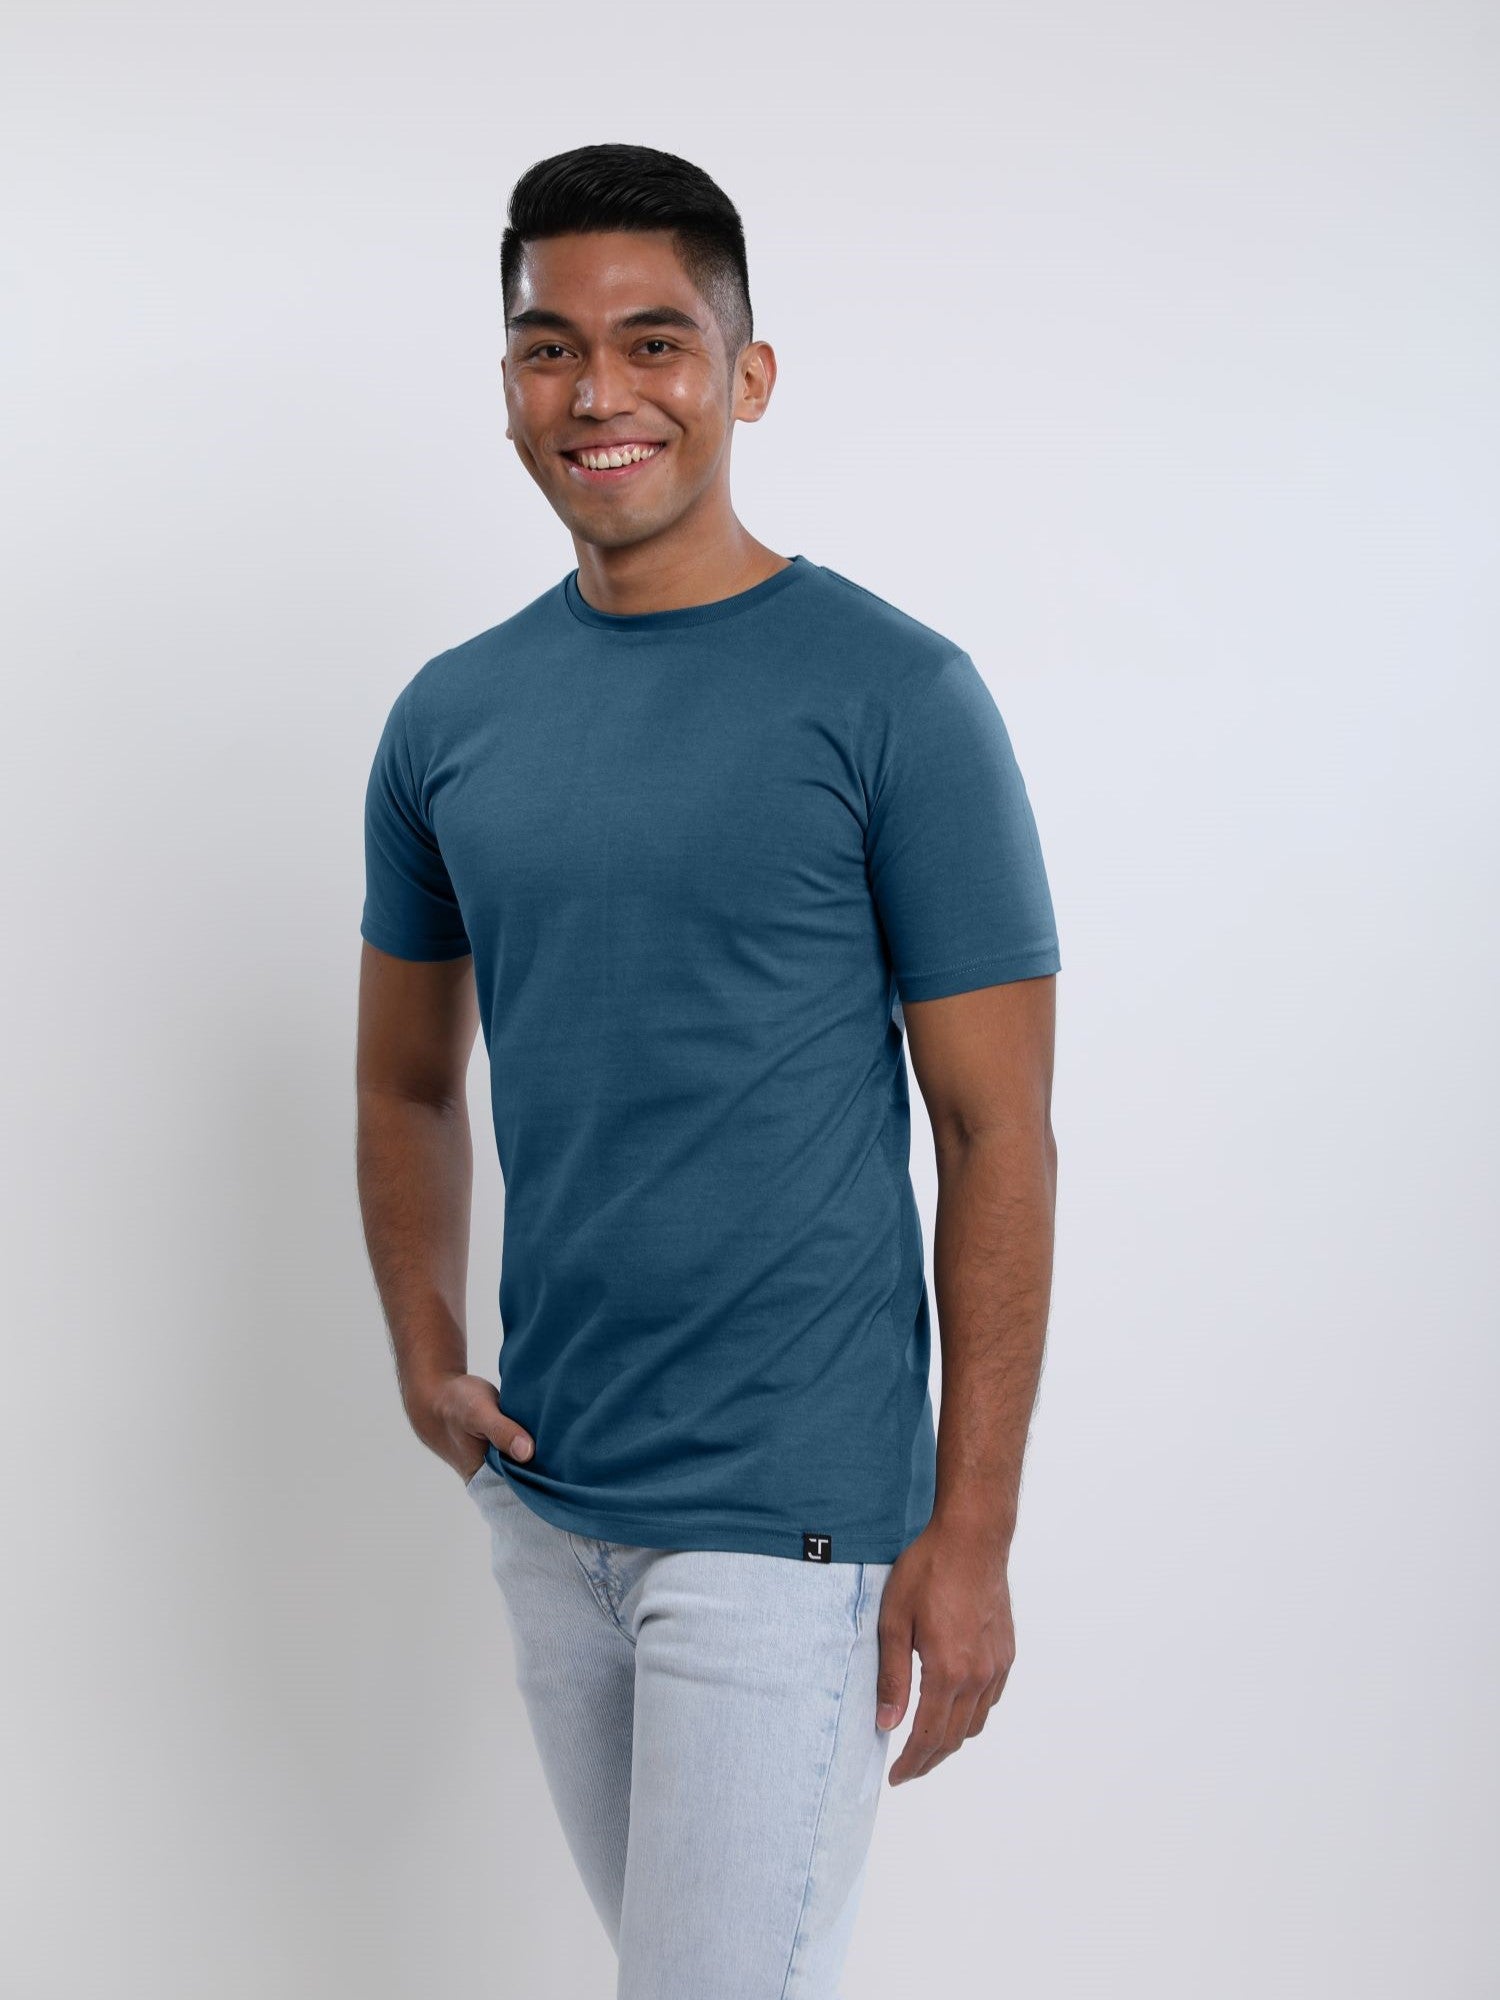 A tall and slim man in the studio standing in front of a light background with one hand in his pocket. The smiling model is wearing an extra long slim petrol t-shirt in a size medium. The tall petrol t-shirt features a 3" longer body, 100% organic cotton, and is soft & preshrunk. The petrol t-shirt is ideal for tall slim men 6'2"+.